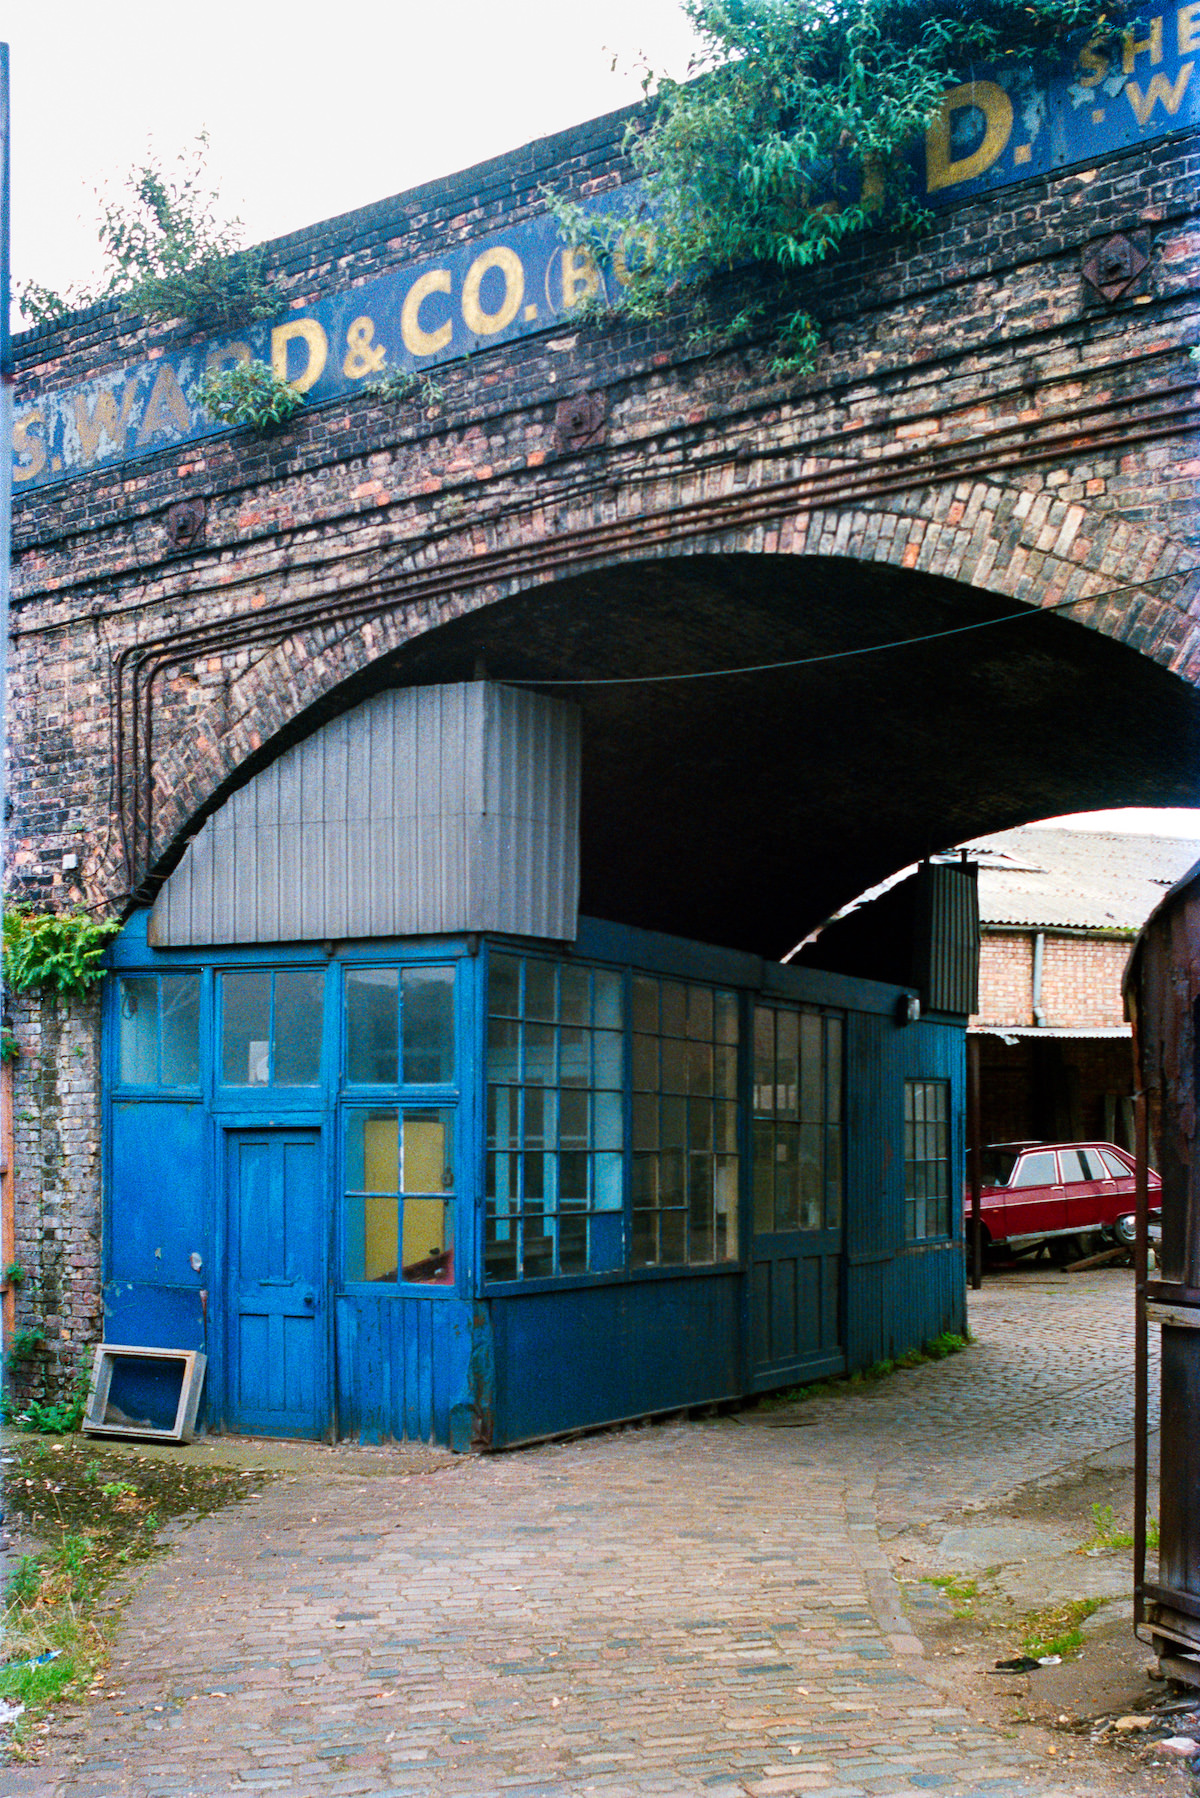 S Ward & Co, Railway Arch, Limehouse Dock, Limehouse, Tower Hamlets, 1986